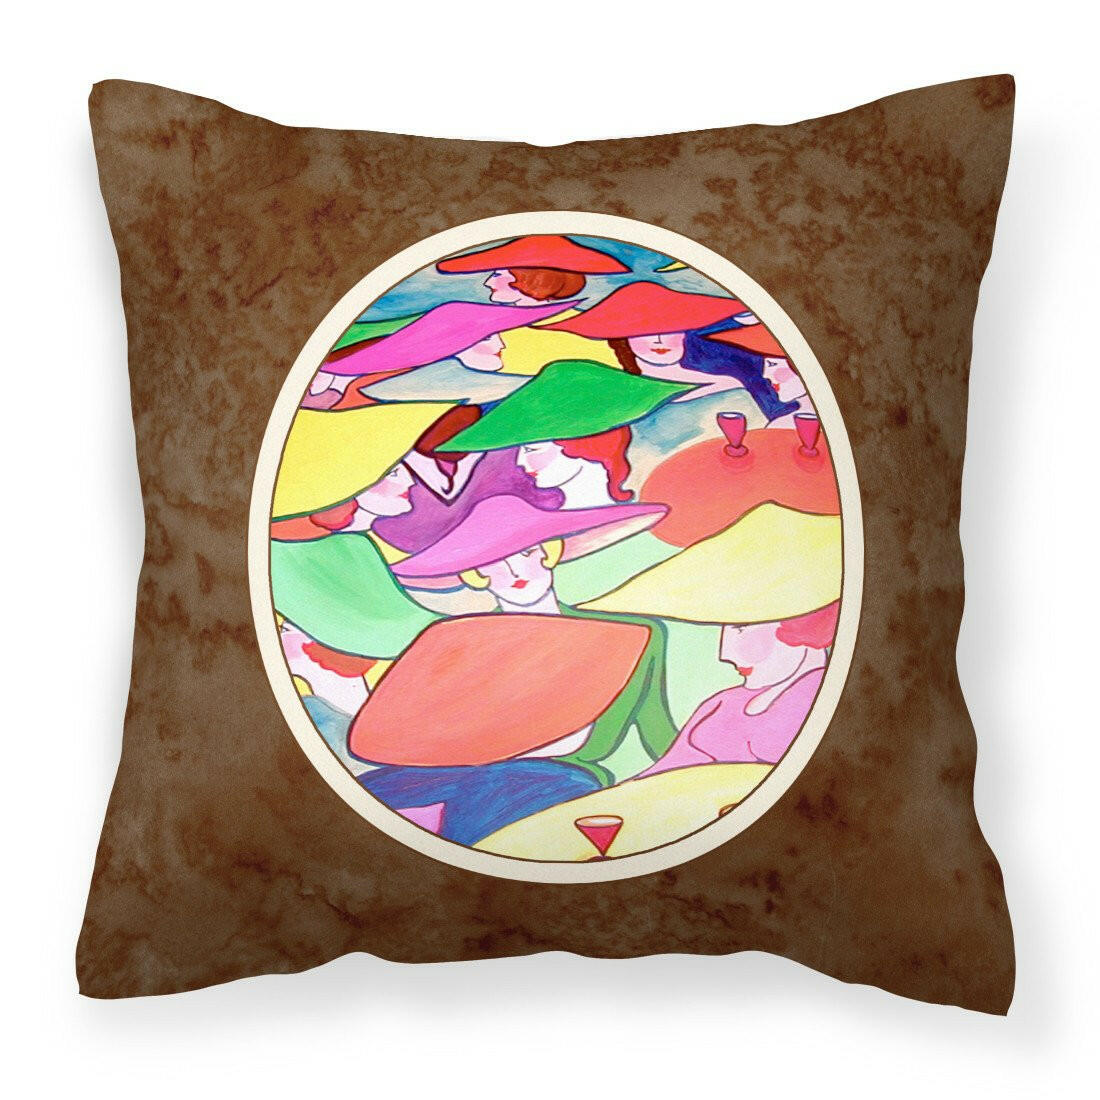 Women in Hats Fabric Decorative Pillow 7194PW1414 - the-store.com